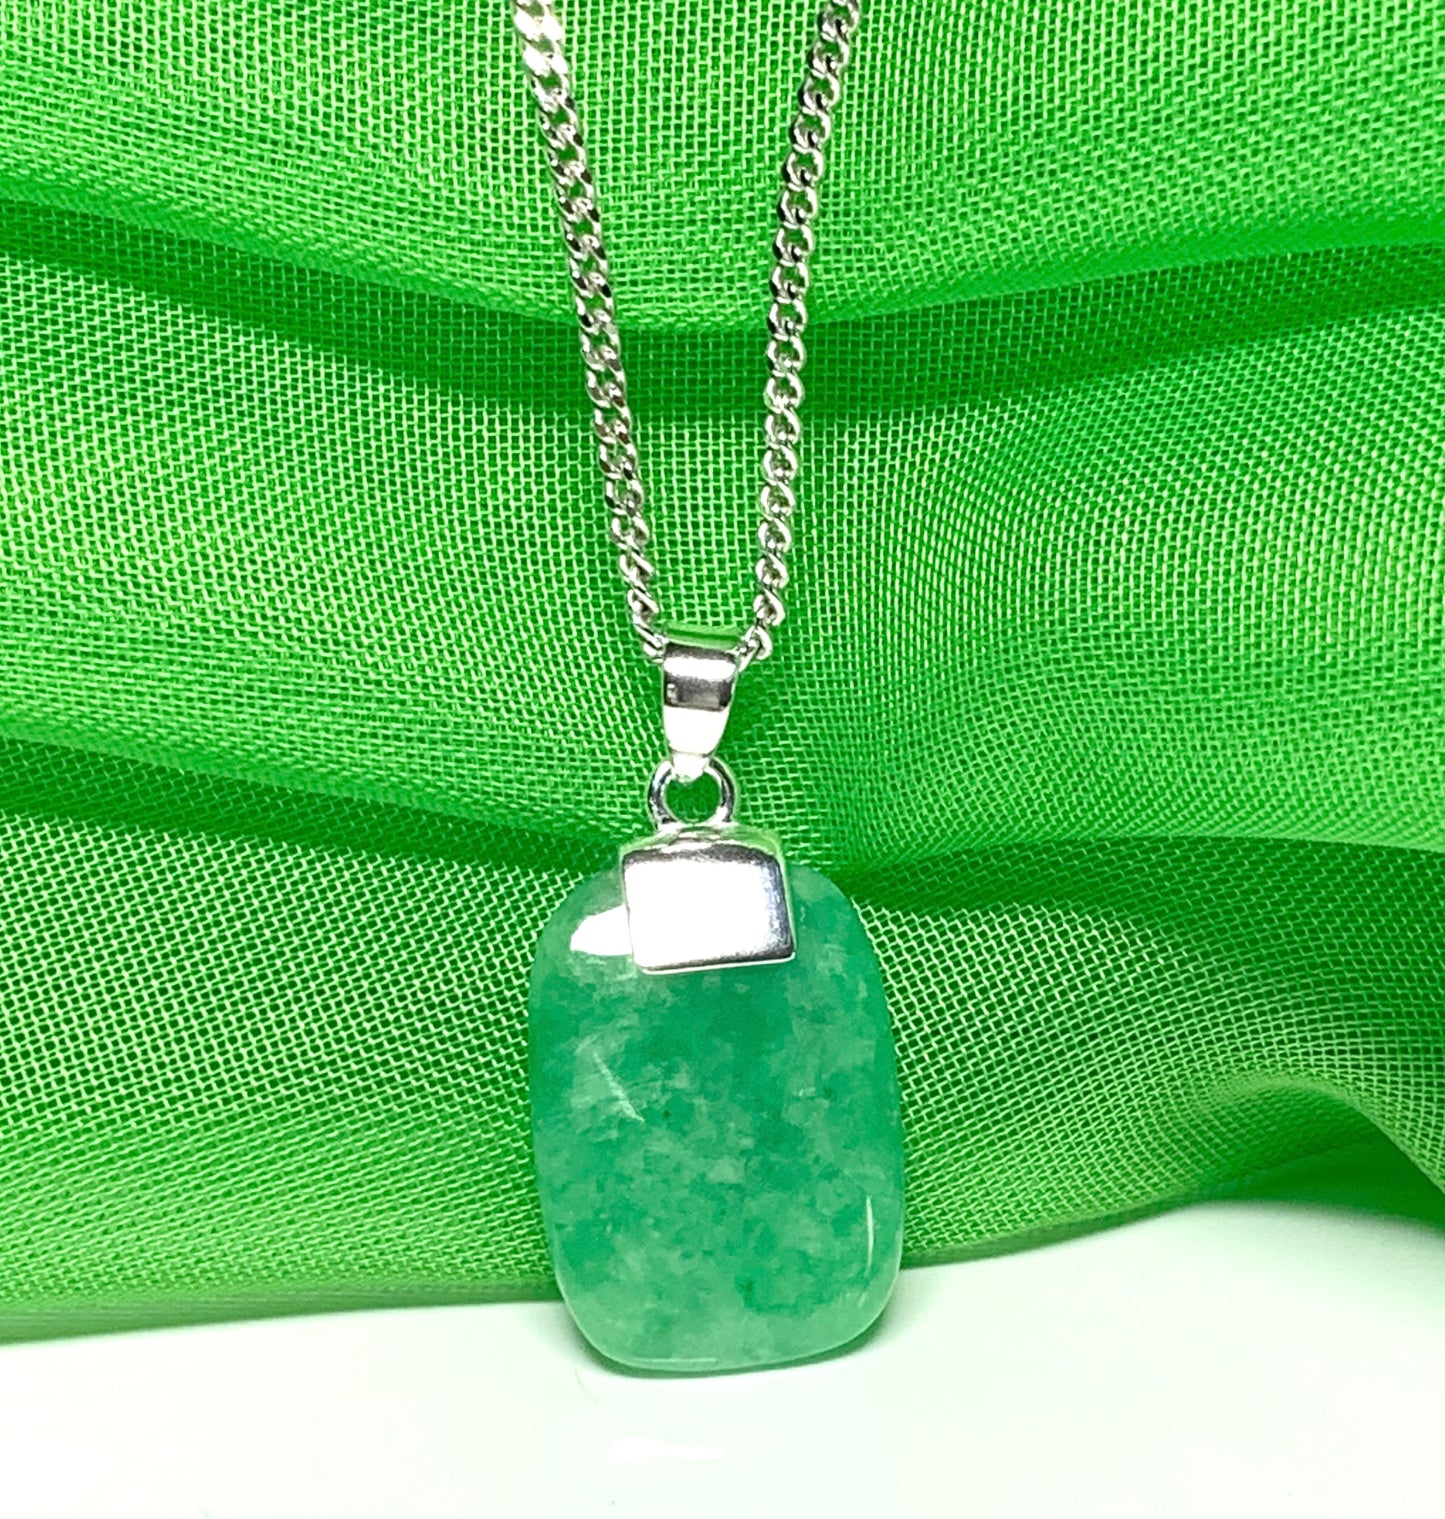 Real green jade necklace cushion shaped stone pendant sterling silver including chain